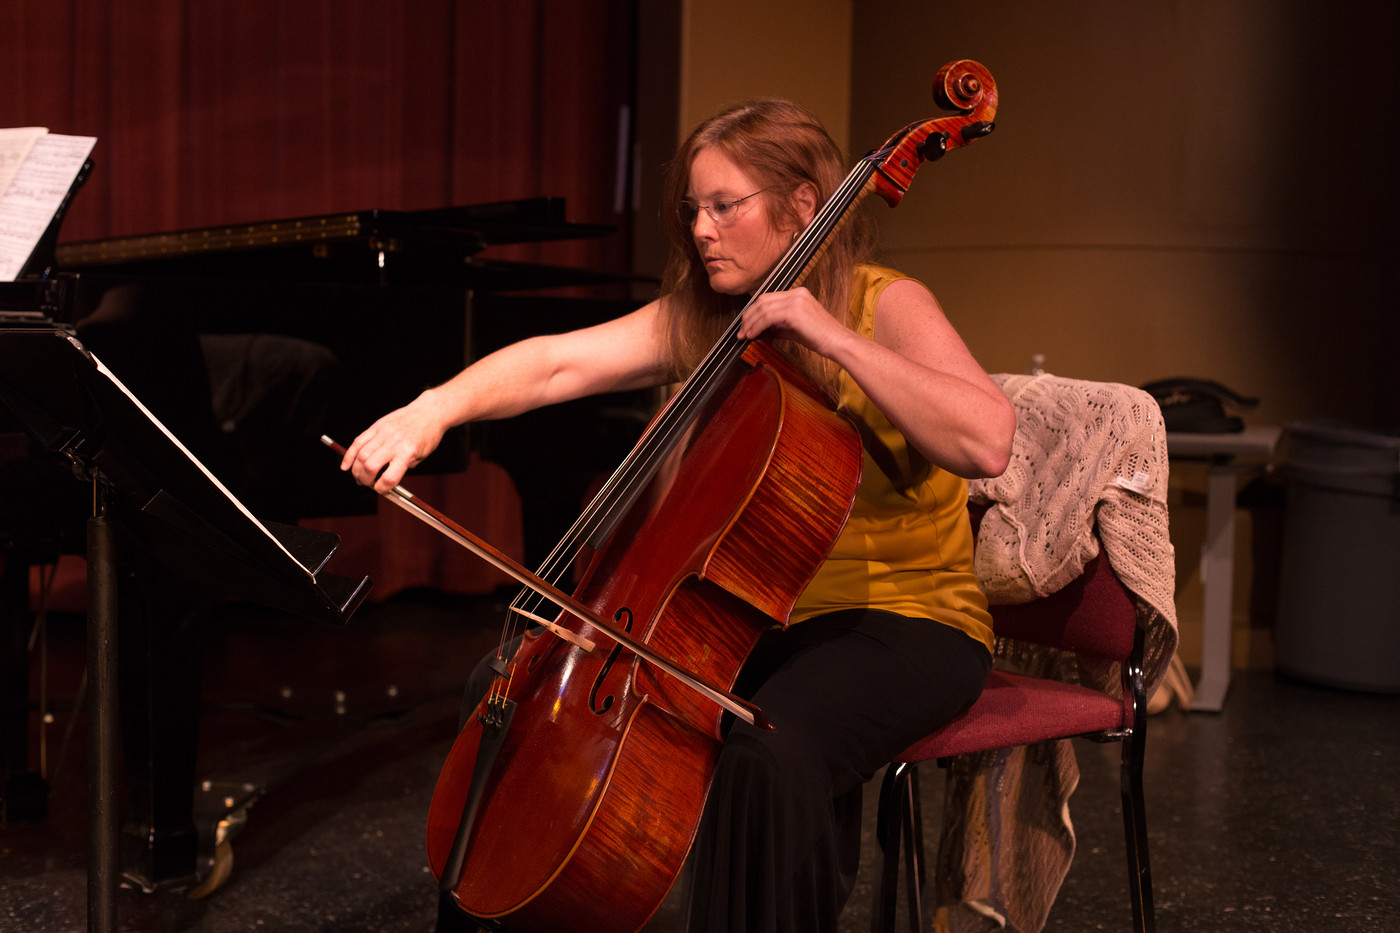 City College student Christine Zdunkiewicz plays the cello at a recital in the Performing Arts Center March 31, 2016. Hector Flores, Staff Photographer. | hectorfloresexpress@gmail.com